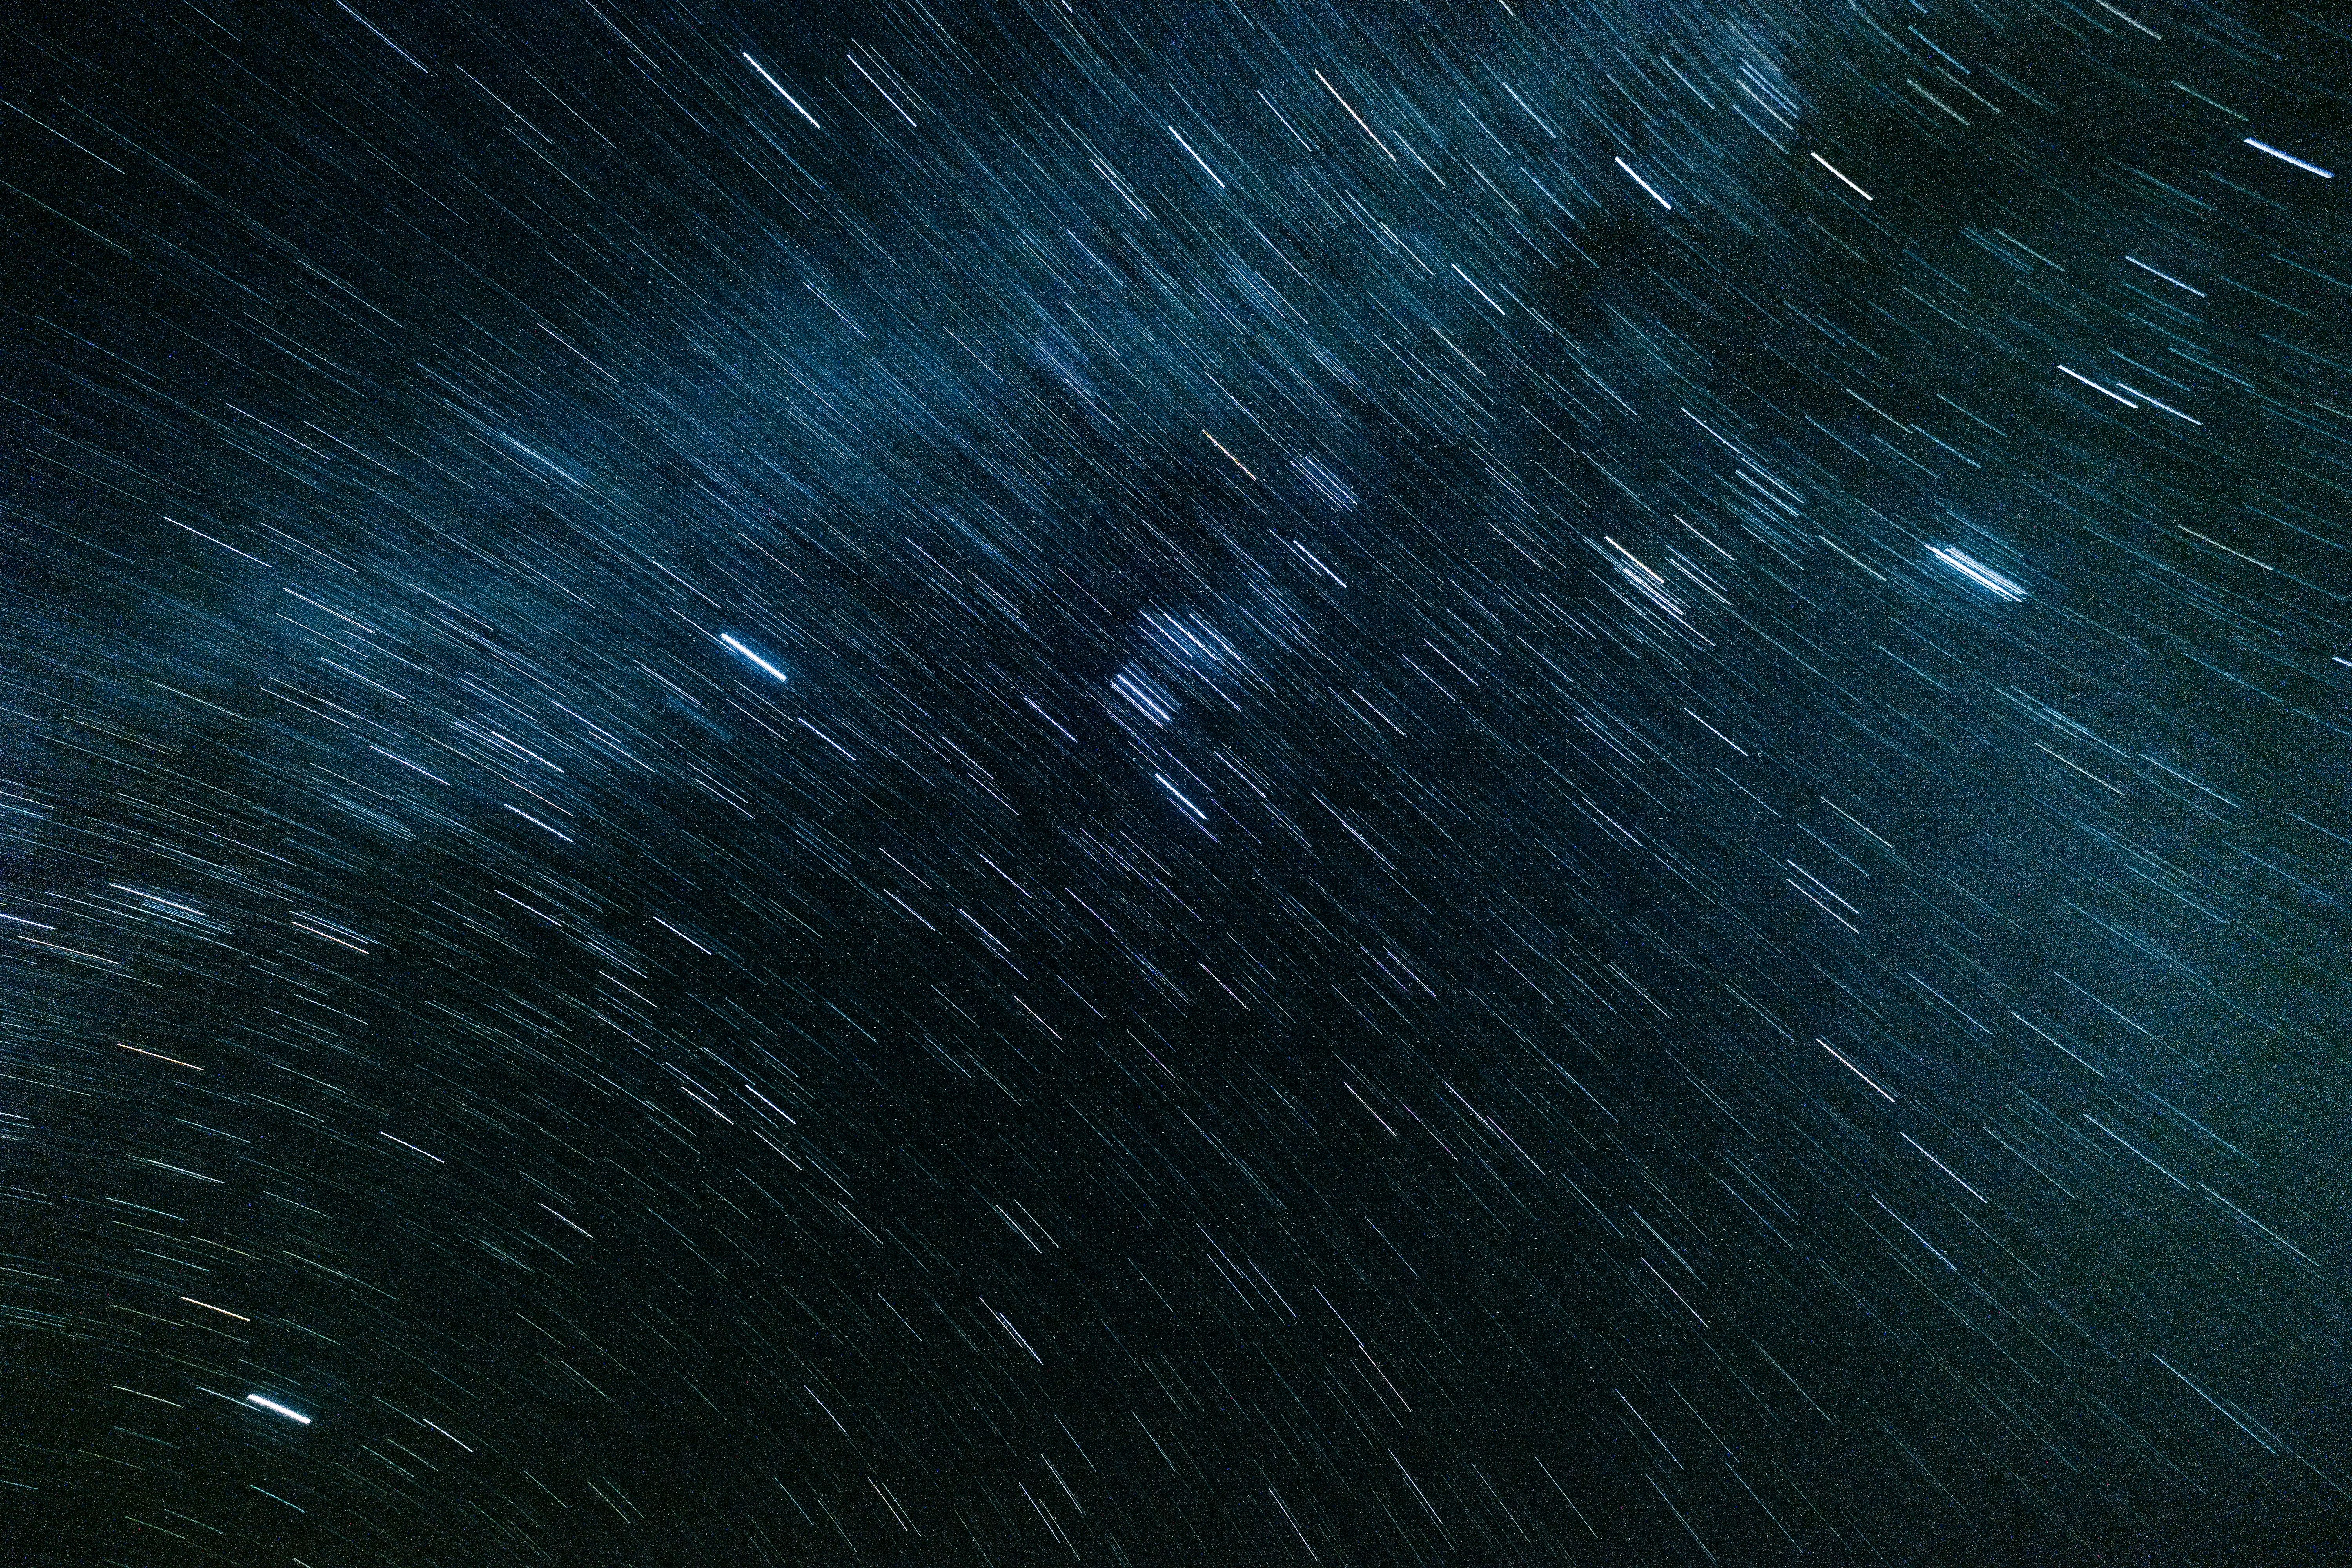 A night sky with stars and streaks - Space